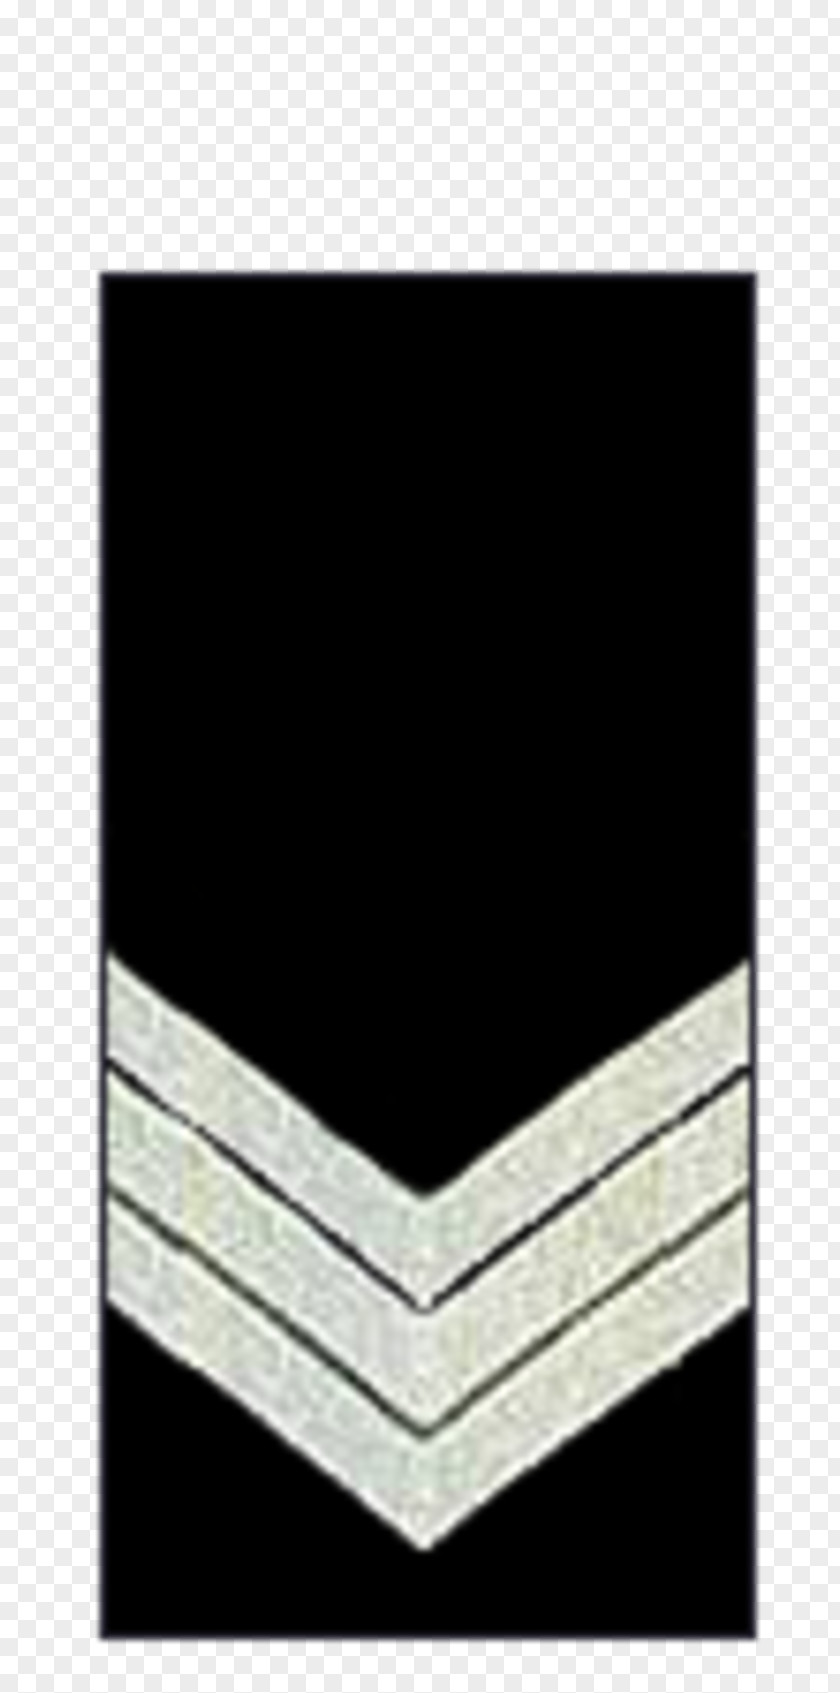 Police Chief Master Sergeant Of The Air Force Gunnery Military Rank PNG